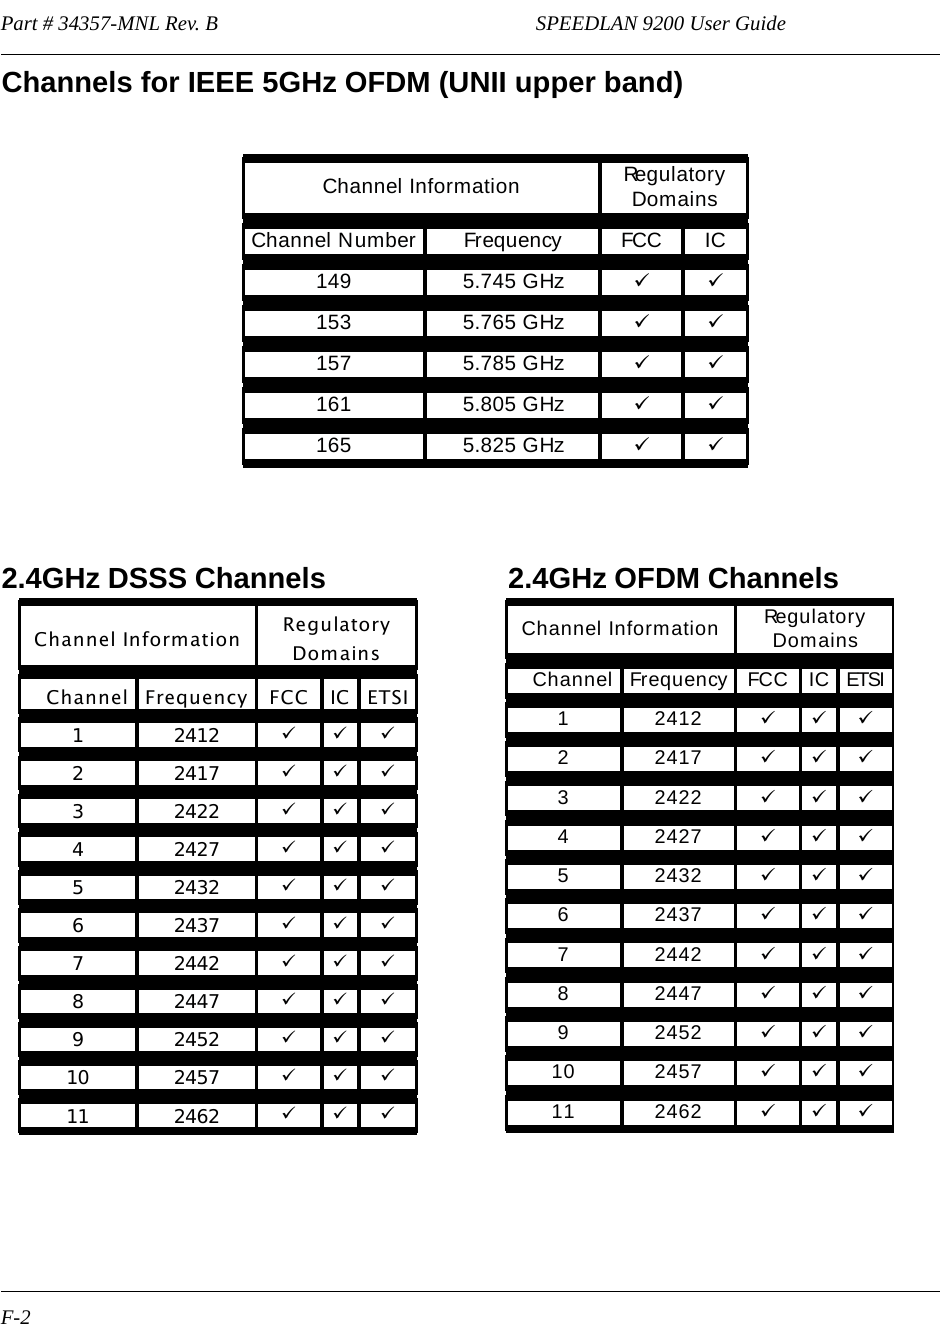 Part # 34357-MNL Rev. B                                                             SPEEDLAN 9200 User Guide F-2Channels for IEEE 5GHz OFDM (UNII upper band)2.4GHz DSSS Channels                        2.4GHz OFDM Channels  Channel Information  Re g u l a t o r y Domains Channel Number Frequency   FCC  IC 149  5.745 GHz  9 9 153  5.765 GHz  9 9 157  5.785 GHz  9 9 161  5.805 GHz  9 9 165  5.825 GHz  9 9 Channel Information  Regulatory Domains    Channel  Frequency  FCC  IC ETSI1   2412   9 9 9 2   2417   9 9 9 3   2422   9 9 9 4   2427   9 9 9 5   2432   9 9 9 6   2437   9 9 9 7   2442   9 9 9 8   2447   9 9 9 9   2452   9 9 9 10   2457   9 9 9 11   2462   9 9 9  Channel Information  Re g u l a t o r y  Domains    Channel Frequency  FCC  IC  ETSI1   2412   9 9 9 2   2417   9 9 9 3   2422   9 9 9 4   2427   9 9 9 5   2432   9 9 9 6   2437   9 9 9 7   2442   9 9 9 8   2447   9 9 9 9   2452   9 9 9 10   2457   9 9 9 11   2462   9 9 9               